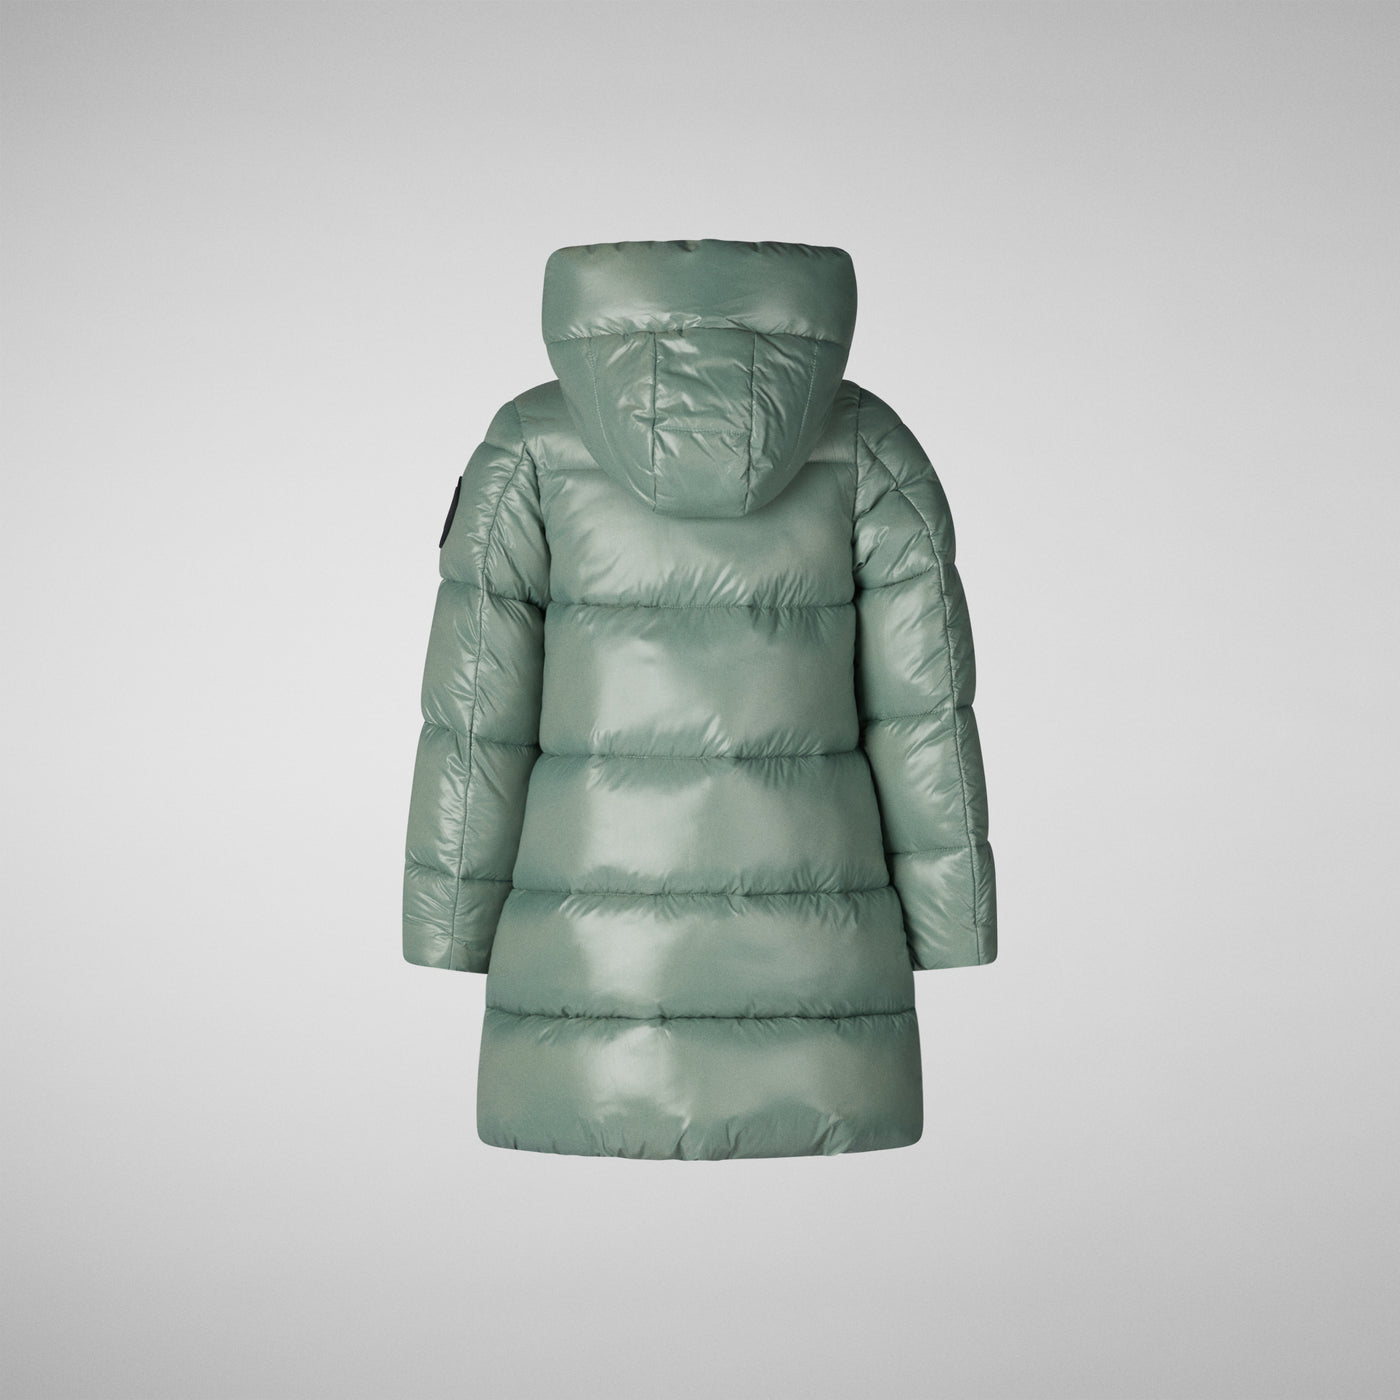 Product Back View of Girls' Chase Faux Fur Lined Hooded Puffer Coat in Seaweed Green